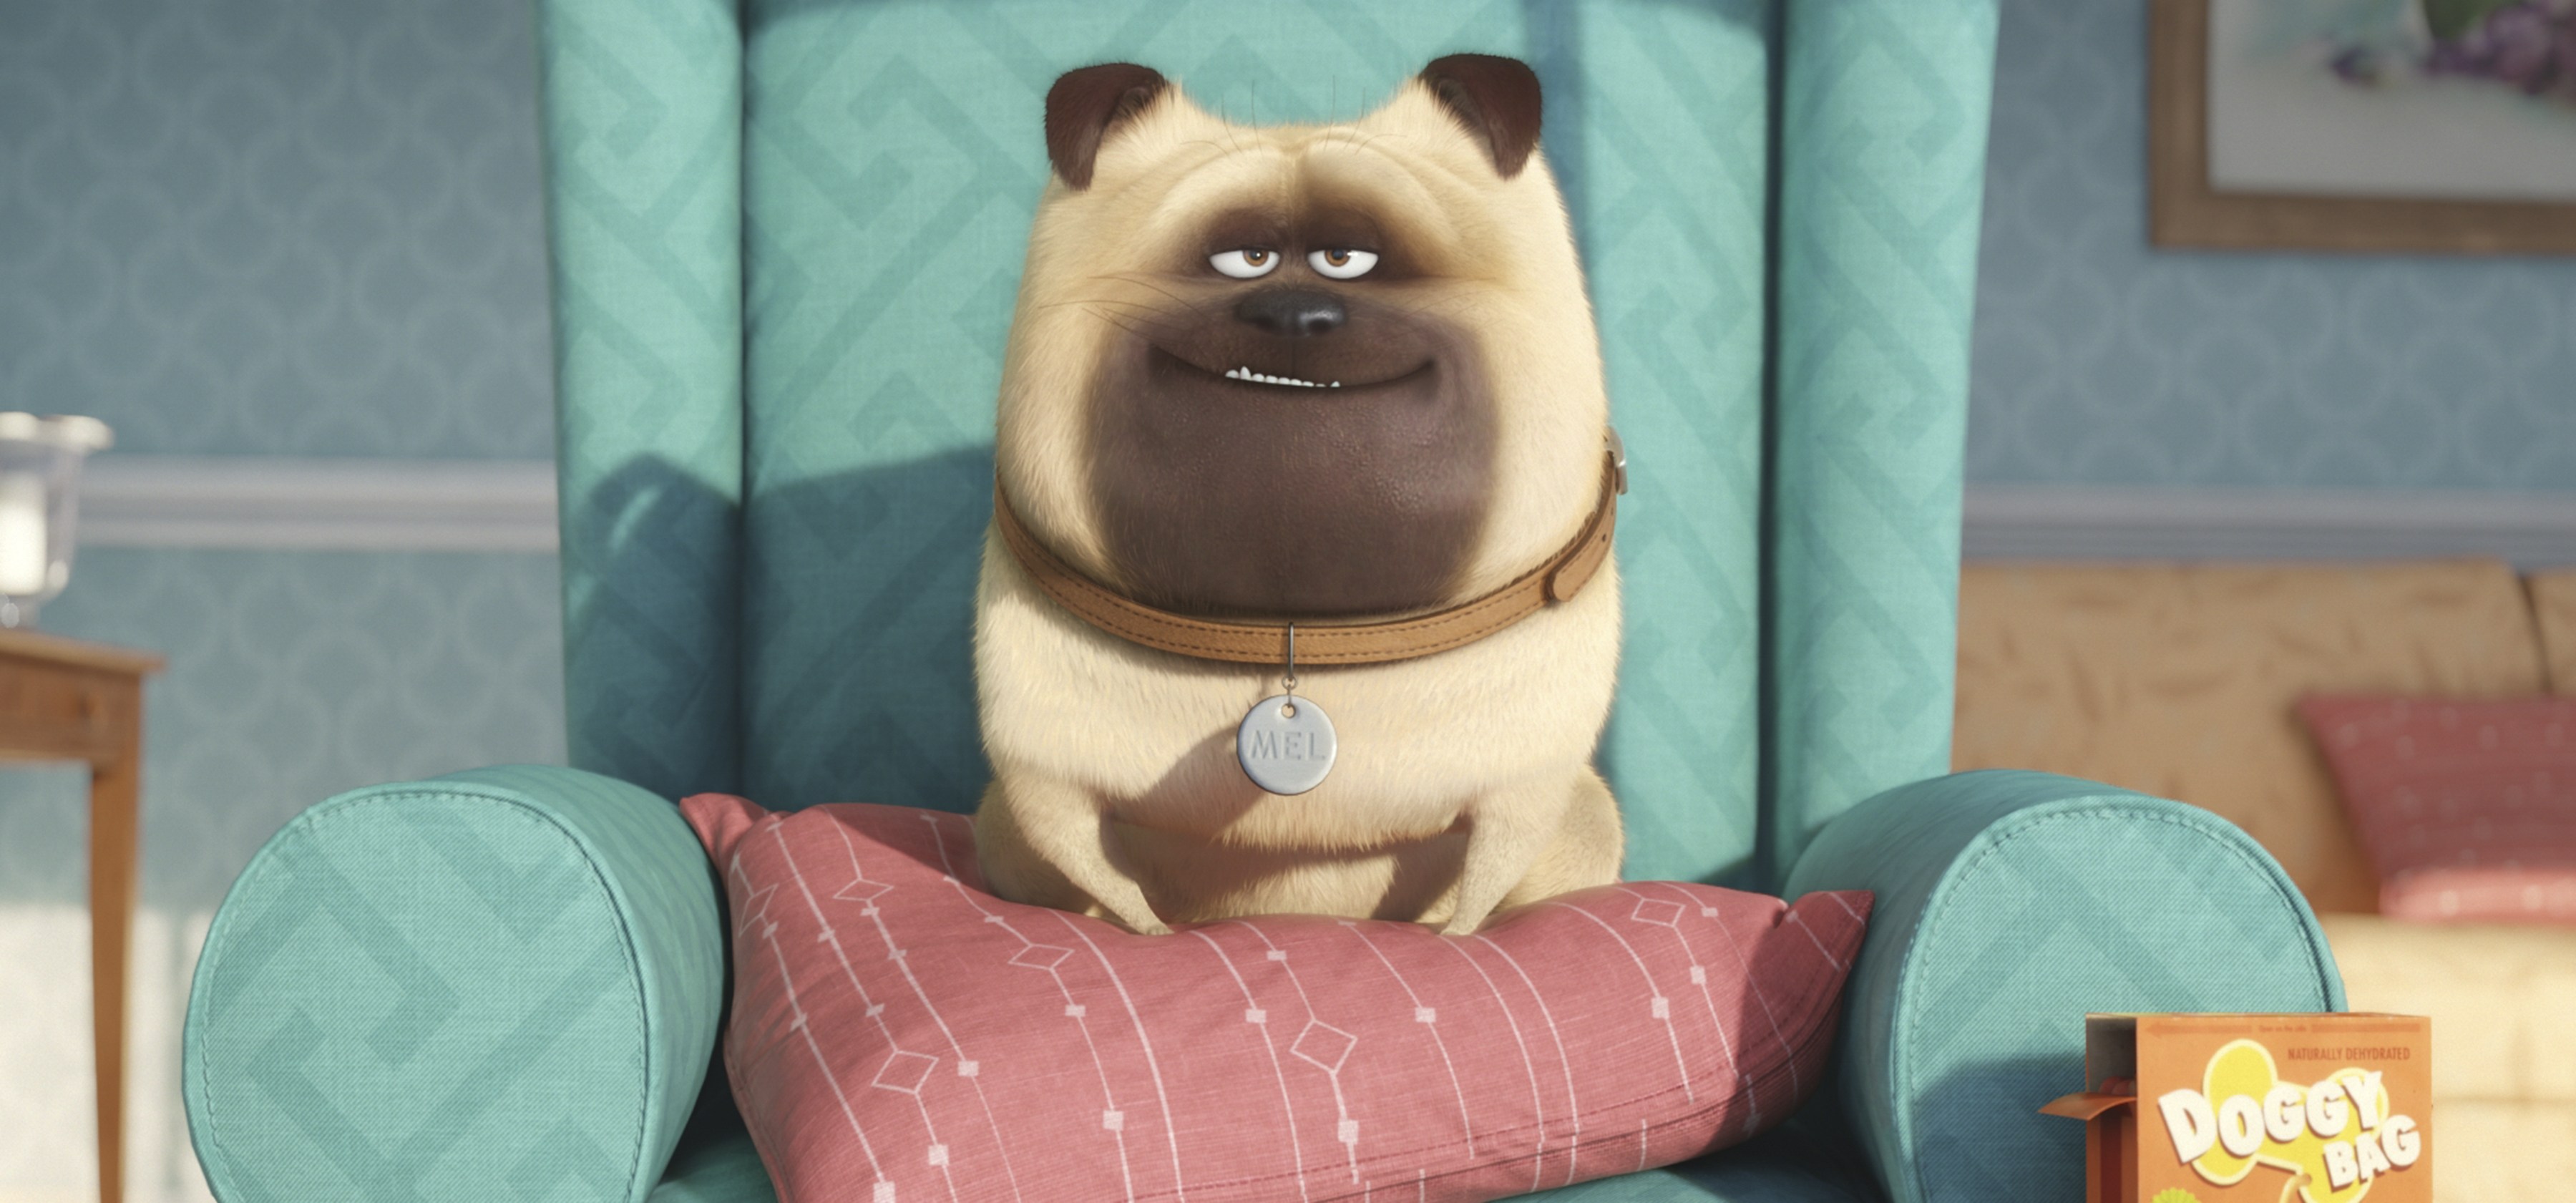 Wallpapers The Secret Life Of Pets dog animated movies on the desktop